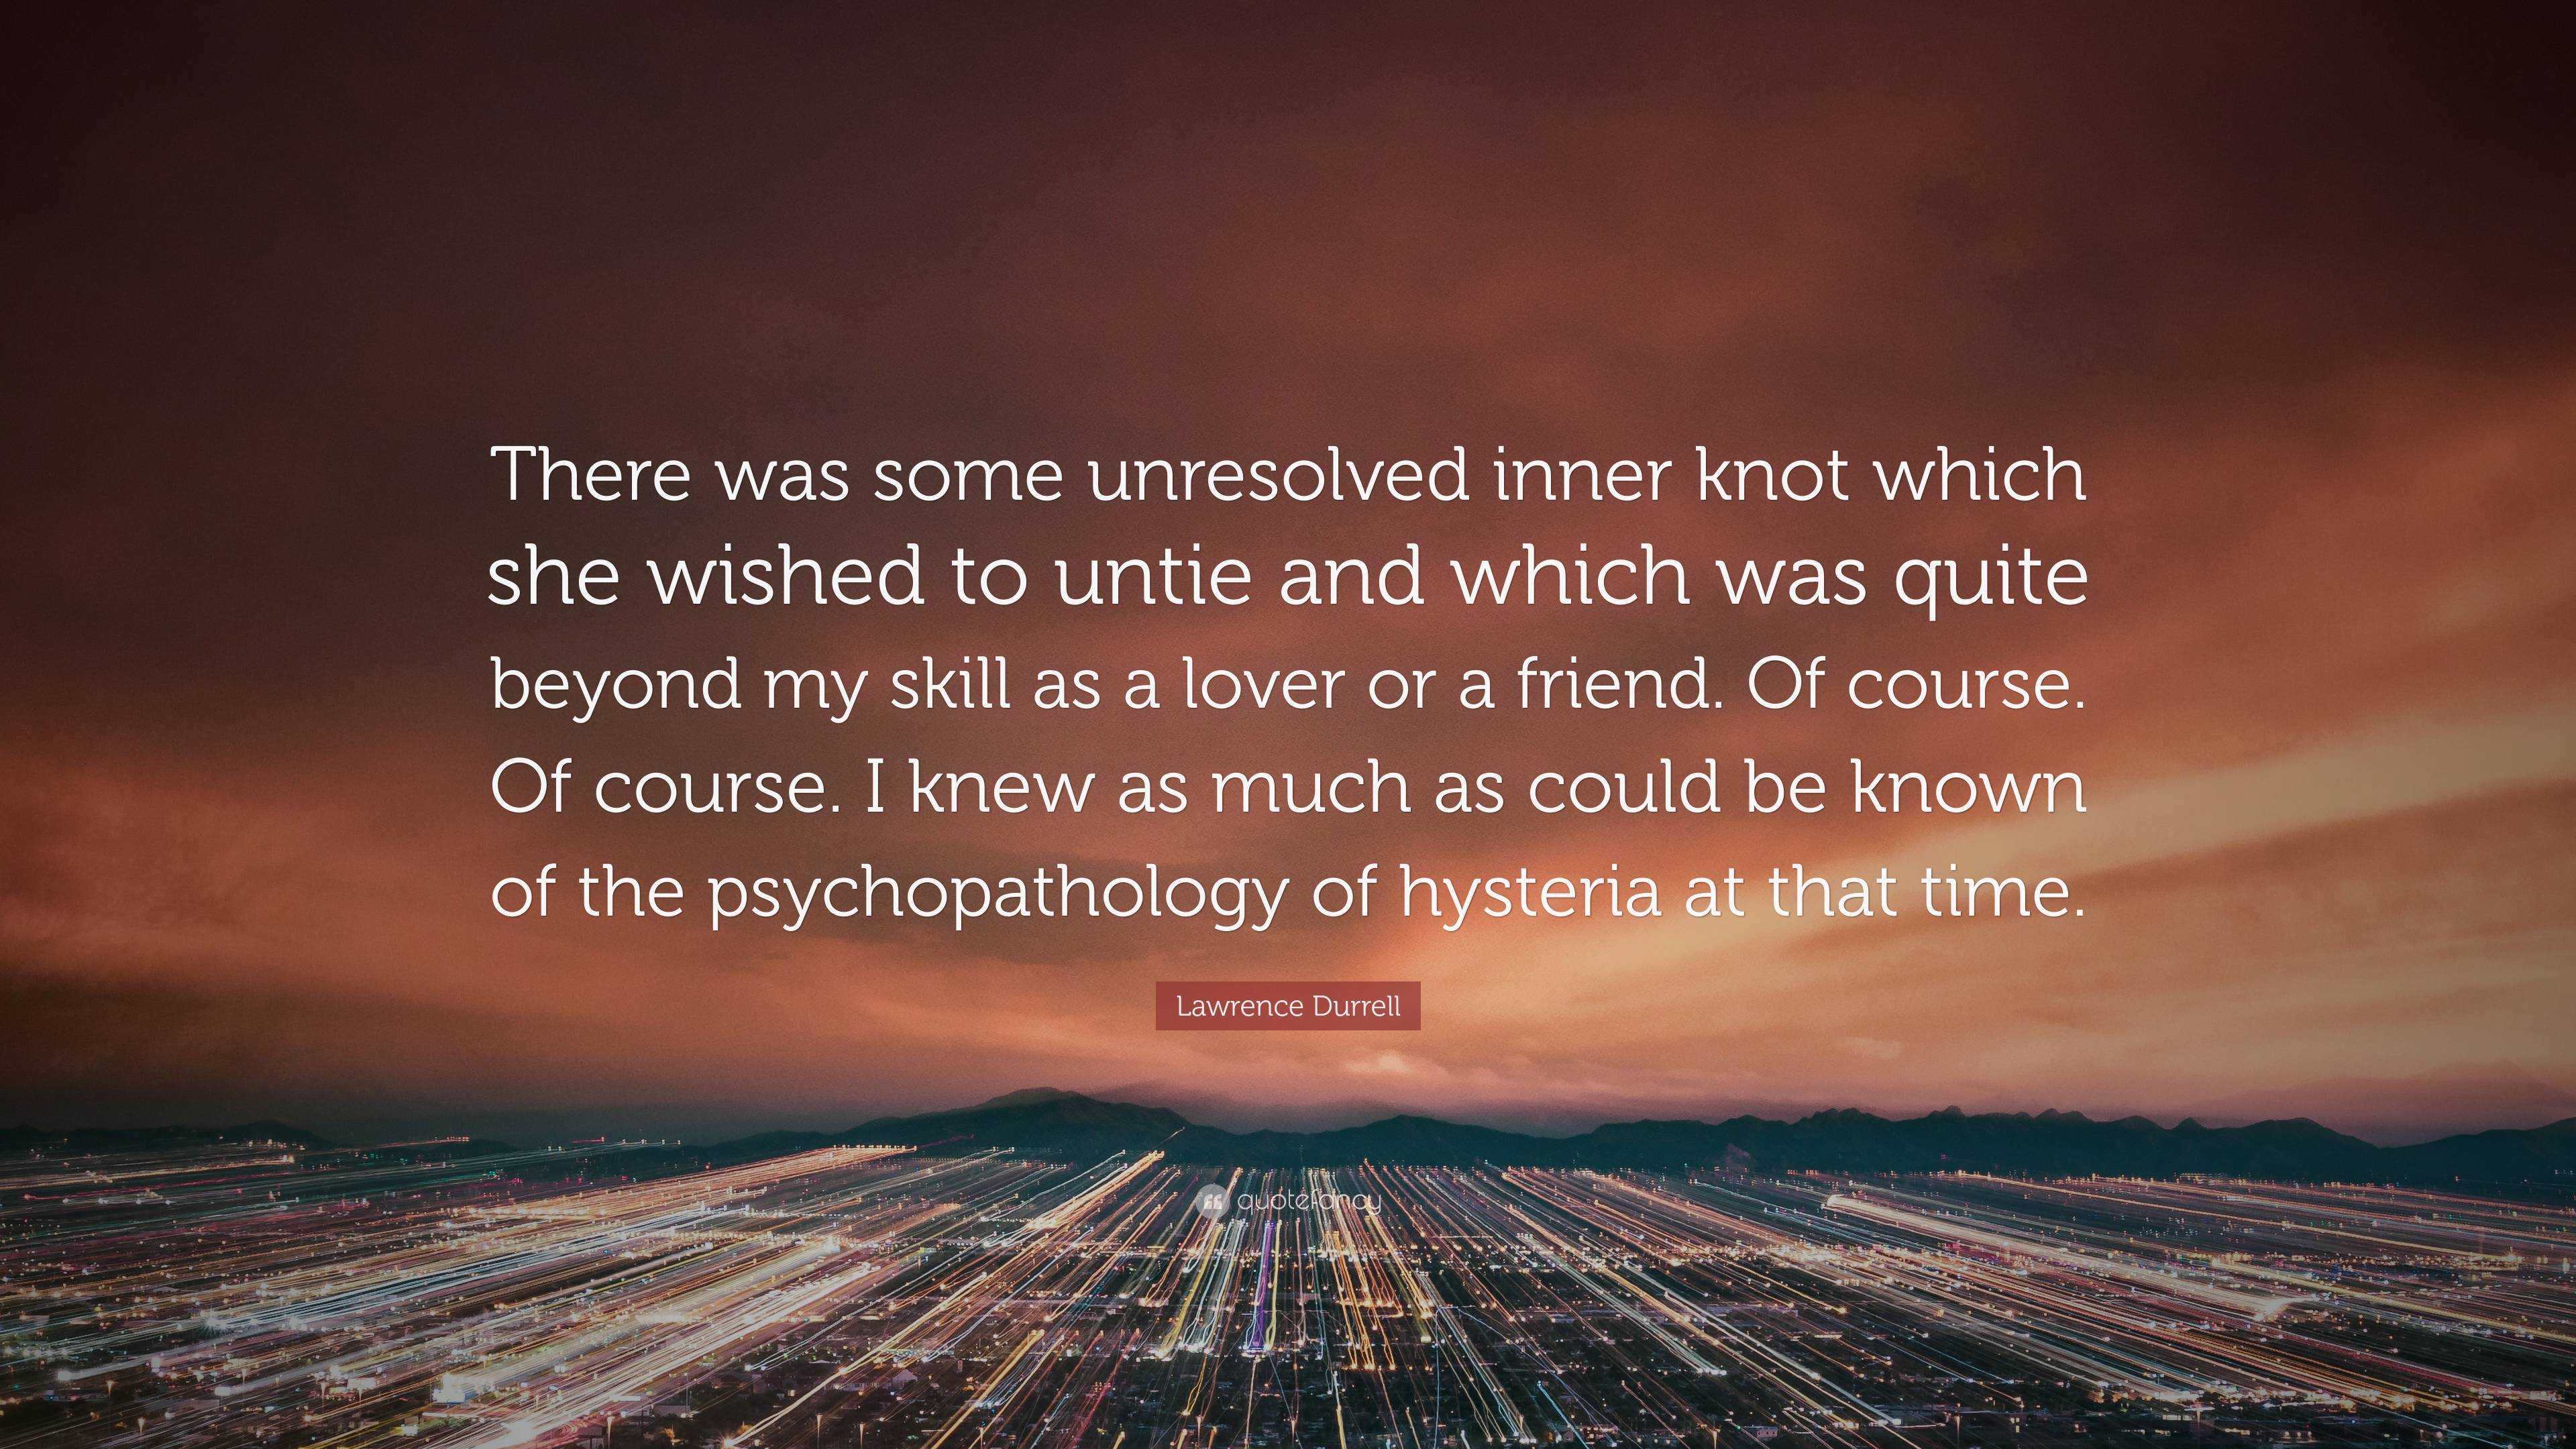 Lawrence Durrell Quote There Was Some Unresolved Inner Knot Which She Wished To Untie And